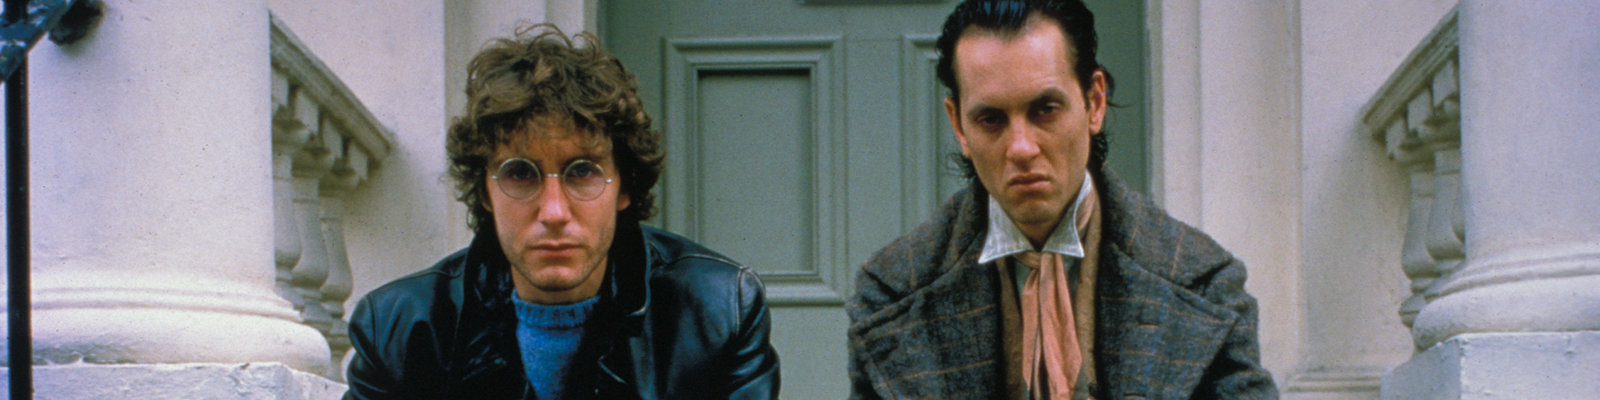 Richard E Grant and Paul McGann in Withnail and I